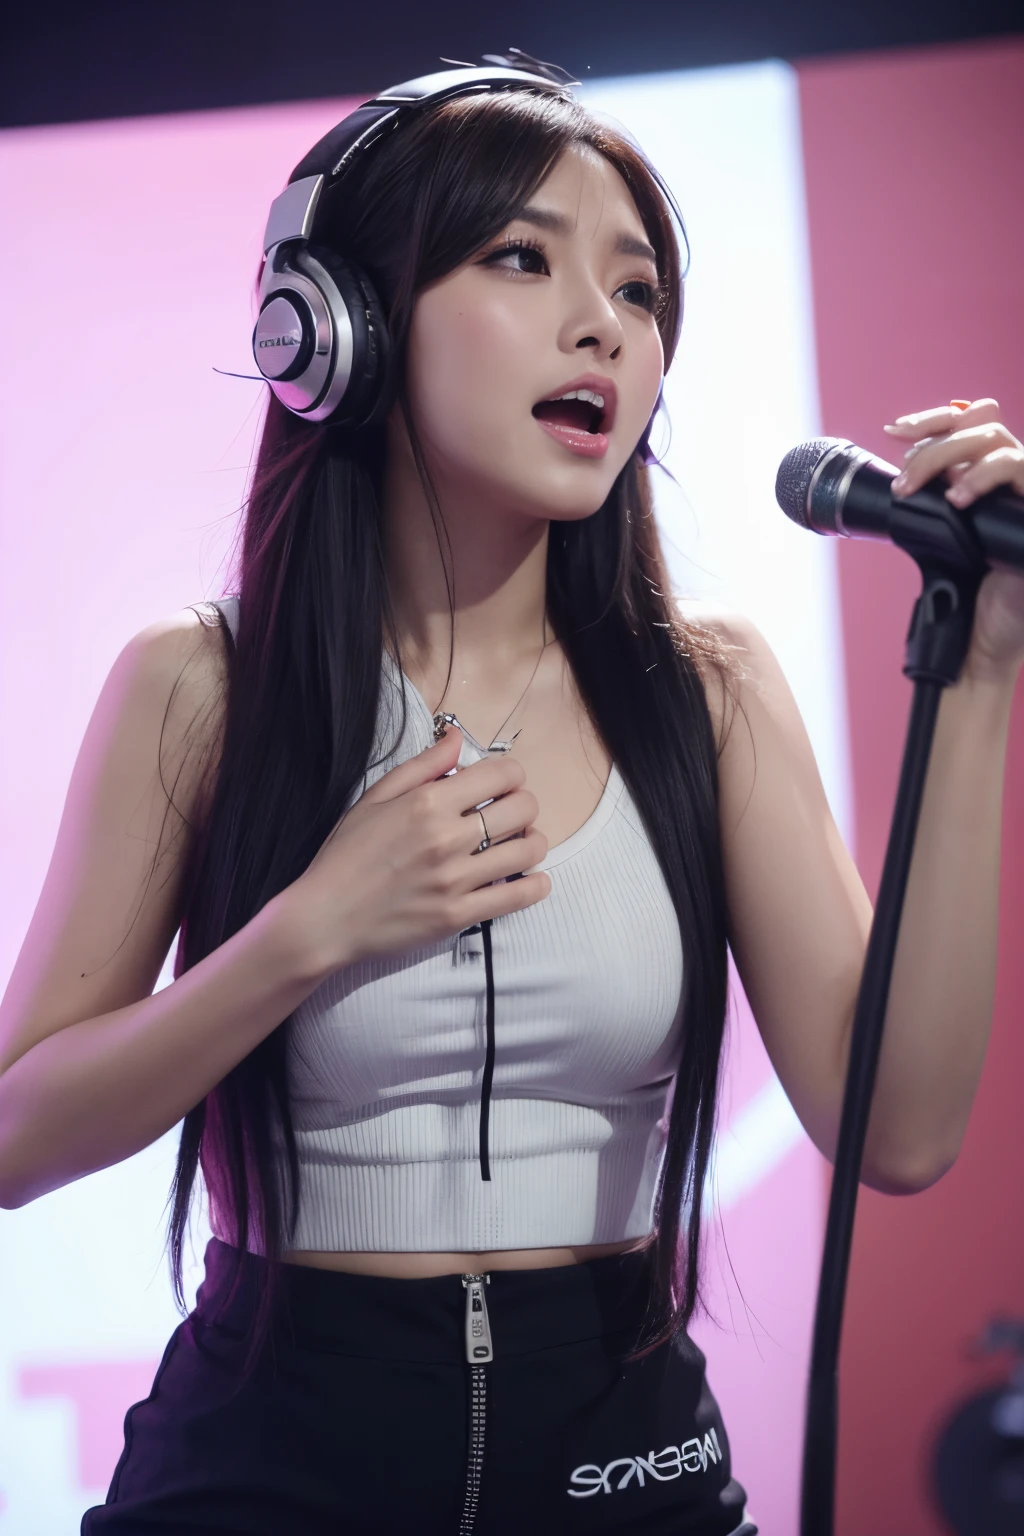 8k, highest quality, ultra details, Indonesian singer named Sella, music, performance, studio recording, headphones, microphone, passionate expression.